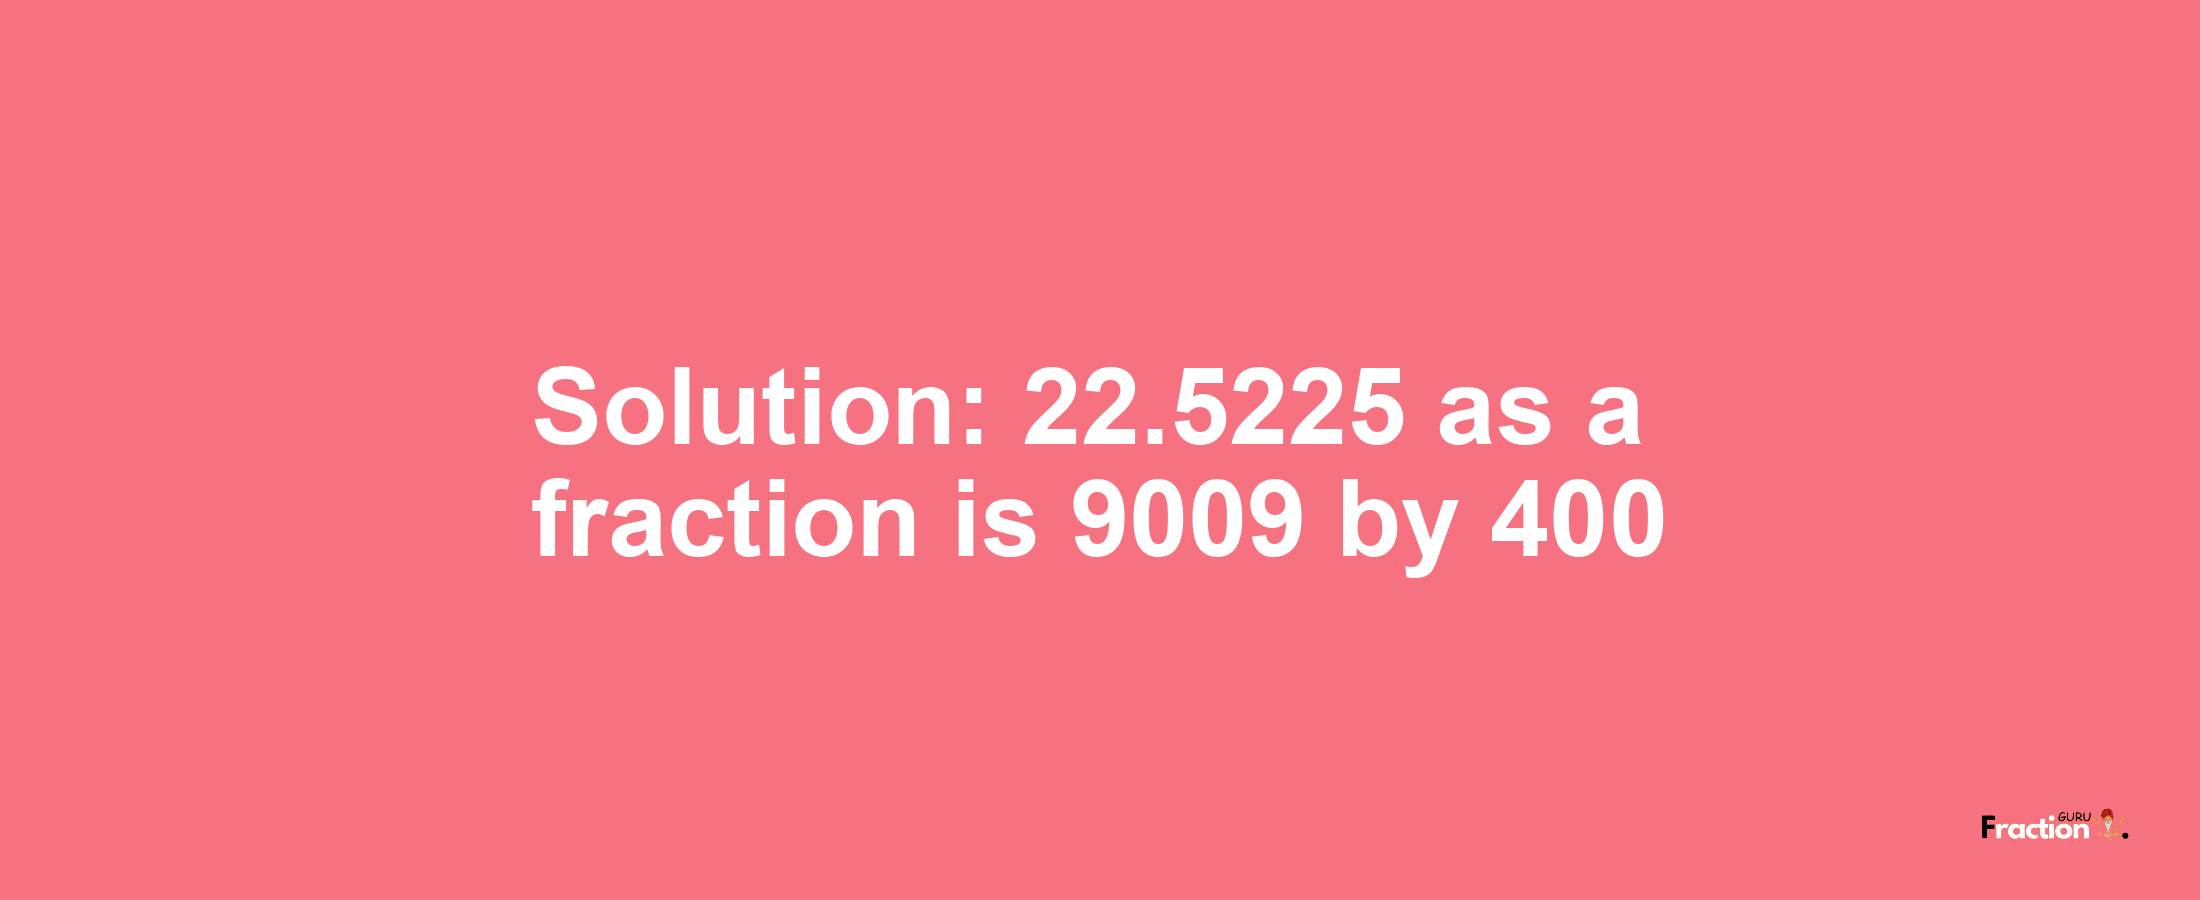 Solution:22.5225 as a fraction is 9009/400